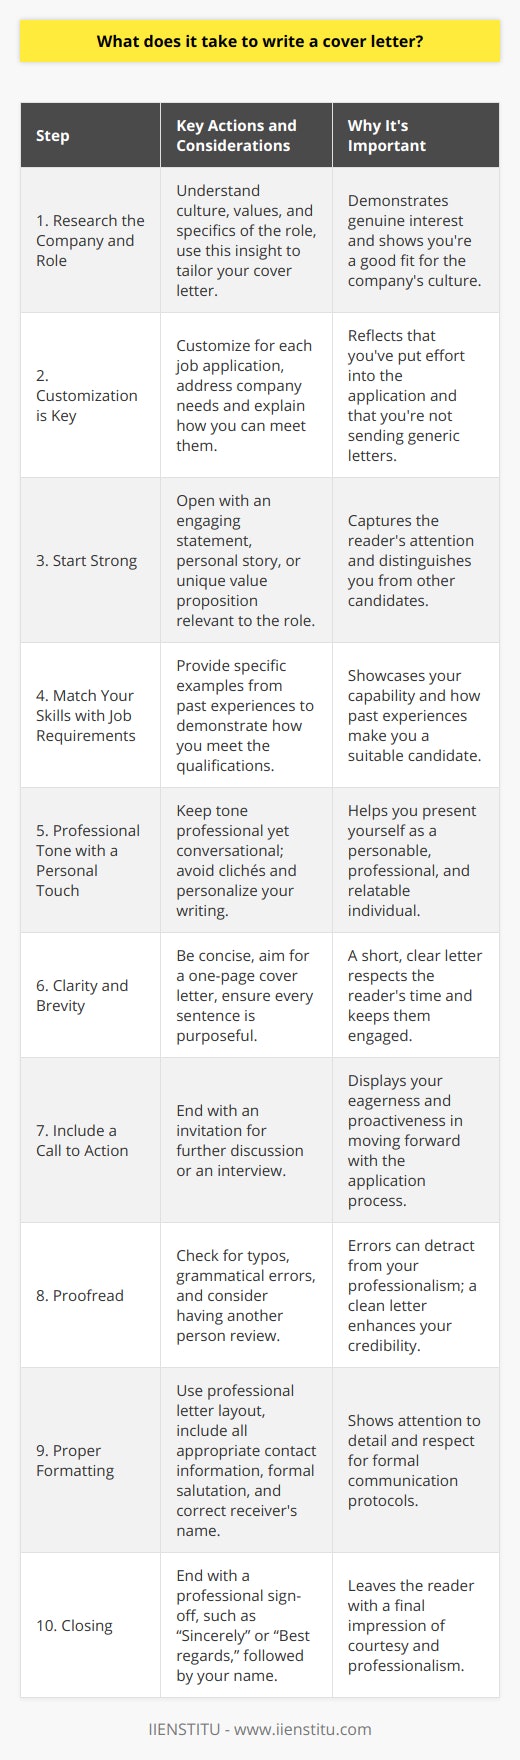 Writing a cover letter is a crucial element of the job application process, allowing you to introduce yourself to potential employers and highlight your suitability for the role. A thoughtful, well-crafted cover letter can set you apart from other applicants, providing a narrative that connects your background to the specific requirements and culture of the company you're applying to. Below are the steps and considerations to keep in mind when writing an effective cover letter.1. **Research the Company and Role**: Before you begin writing, research the company and the job you’re applying for thoroughly. Understanding the company’s culture, values, and the specifics of the role helps you tailor your cover letter to demonstrate that you are not just a qualified candidate but also a good fit for the organization.2. **Customization is Key**: Avoid generic cover letters. Each cover letter you write should be customized for the specific job application. Use the job description as a guide to identifying the most important skills and experiences to highlight. Address the actual needs and challenges of the company and explain how your background positions you to address those effectively.3. **Start Strong**: The opening of your cover letter should grab the reader’s attention. Begin by stating why you’re excited about the job and the company. An engaging personal story or a unique value proposition can be effective here, as long as it’s relevant to the position.4. **Match Your Skills with Job Requirements**: Use specific examples from your past work experiences to demonstrate how you meet the essential qualifications listed in the job description. Rather than simply listing your skills, tell stories that substantiate your abilities and show that you can apply them in a practical environment.5. **Professional Tone with a Personal Touch**: The tone of your cover letter should be professional yet conversational, striking a balance between formality and showing your personality. Stay clear of tired phrases and clichés. Instead, write as if you are having a professional conversation with the hiring manager.6. **Clarity and Brevise**: While detailing your background, be concise. Your cover letter should not exceed one page. Managers often sort through many applications, so a succinct letter that gets to the point is more likely to keep their attention. Make sure every sentence adds value and moves your application forward.7. **Include a Call to Action**: Towards the end of your cover letter, include a call to action that invites the hiring manager to contact you for further discussion or an interview. This shows that you are eager and ready to take the next steps.8. **Proofread**: A cover letter with typos or grammatical errors can make a negative impression. Always proofread your work, or even better, have someone else review it for mistakes you might have missed.9. **Proper Formatting**: Use a professional letter format with your contact information at the top, followed by the date and the employer's contact information. Use a formal salutation, and ensure you have the correct name and title of the person to whom you’re addressing the cover letter.10. **Closing**: End your letter with a professional closing, such as “Sincerely” or “Best regards,” followed by your name.Finally, while examples and templates can be helpful for structure, make sure to avoid copying and pasting entire sections from commonly found cover letter samples online. A unique and original cover letter will stand out much more to an employer, displaying authenticity and dedication.For those looking to strengthen their cover letter writing skills, IIENSTITU offers a variety of courses and resources that educate on advanced writing techniques and how to tailor communications for specific professional scenarios. Leveraging these resources can give you an edge in crafting an outstanding cover letter that truly represents your individual strengths and capabilities.